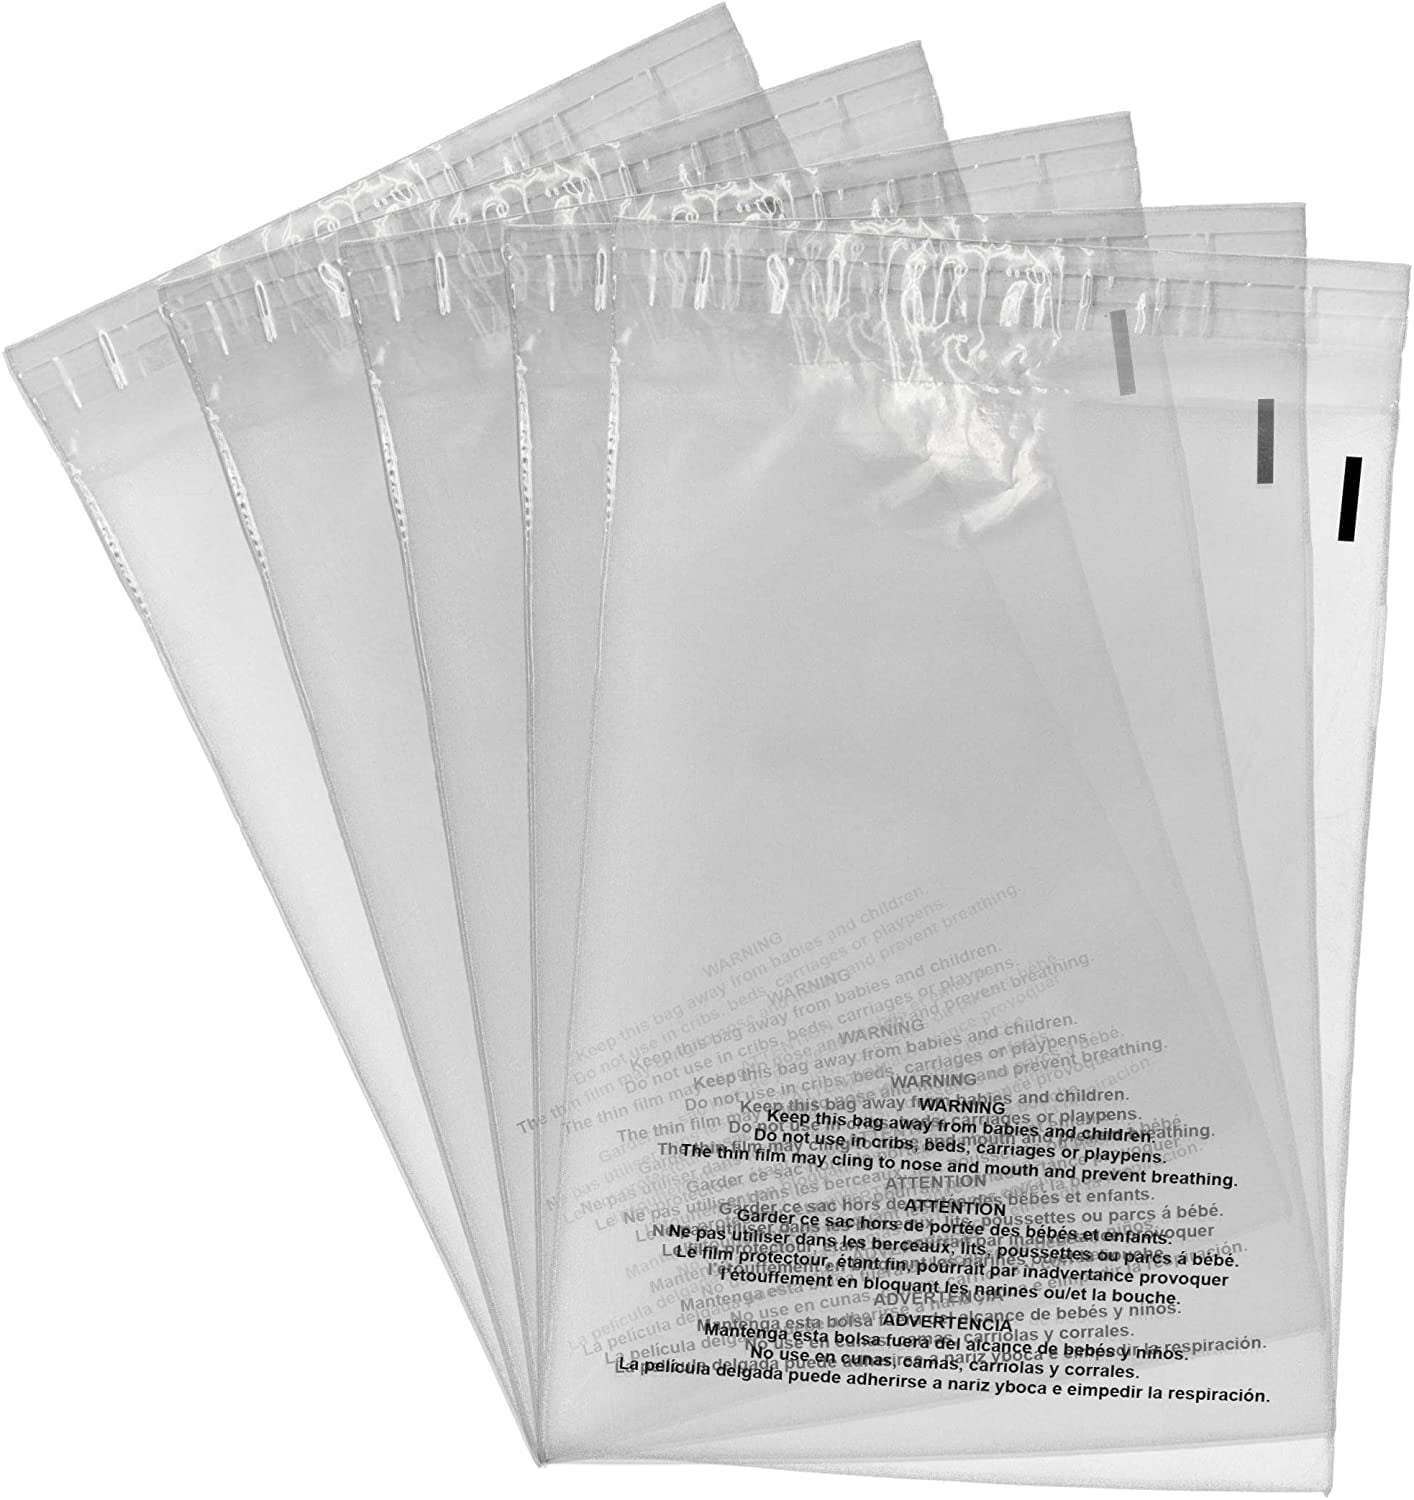 Shop4Mailers 11 x 14 Clear Cellophane Resealable Bags Suffocation Warning Self Seal Envelopes 1.2 mil 1000 Pack